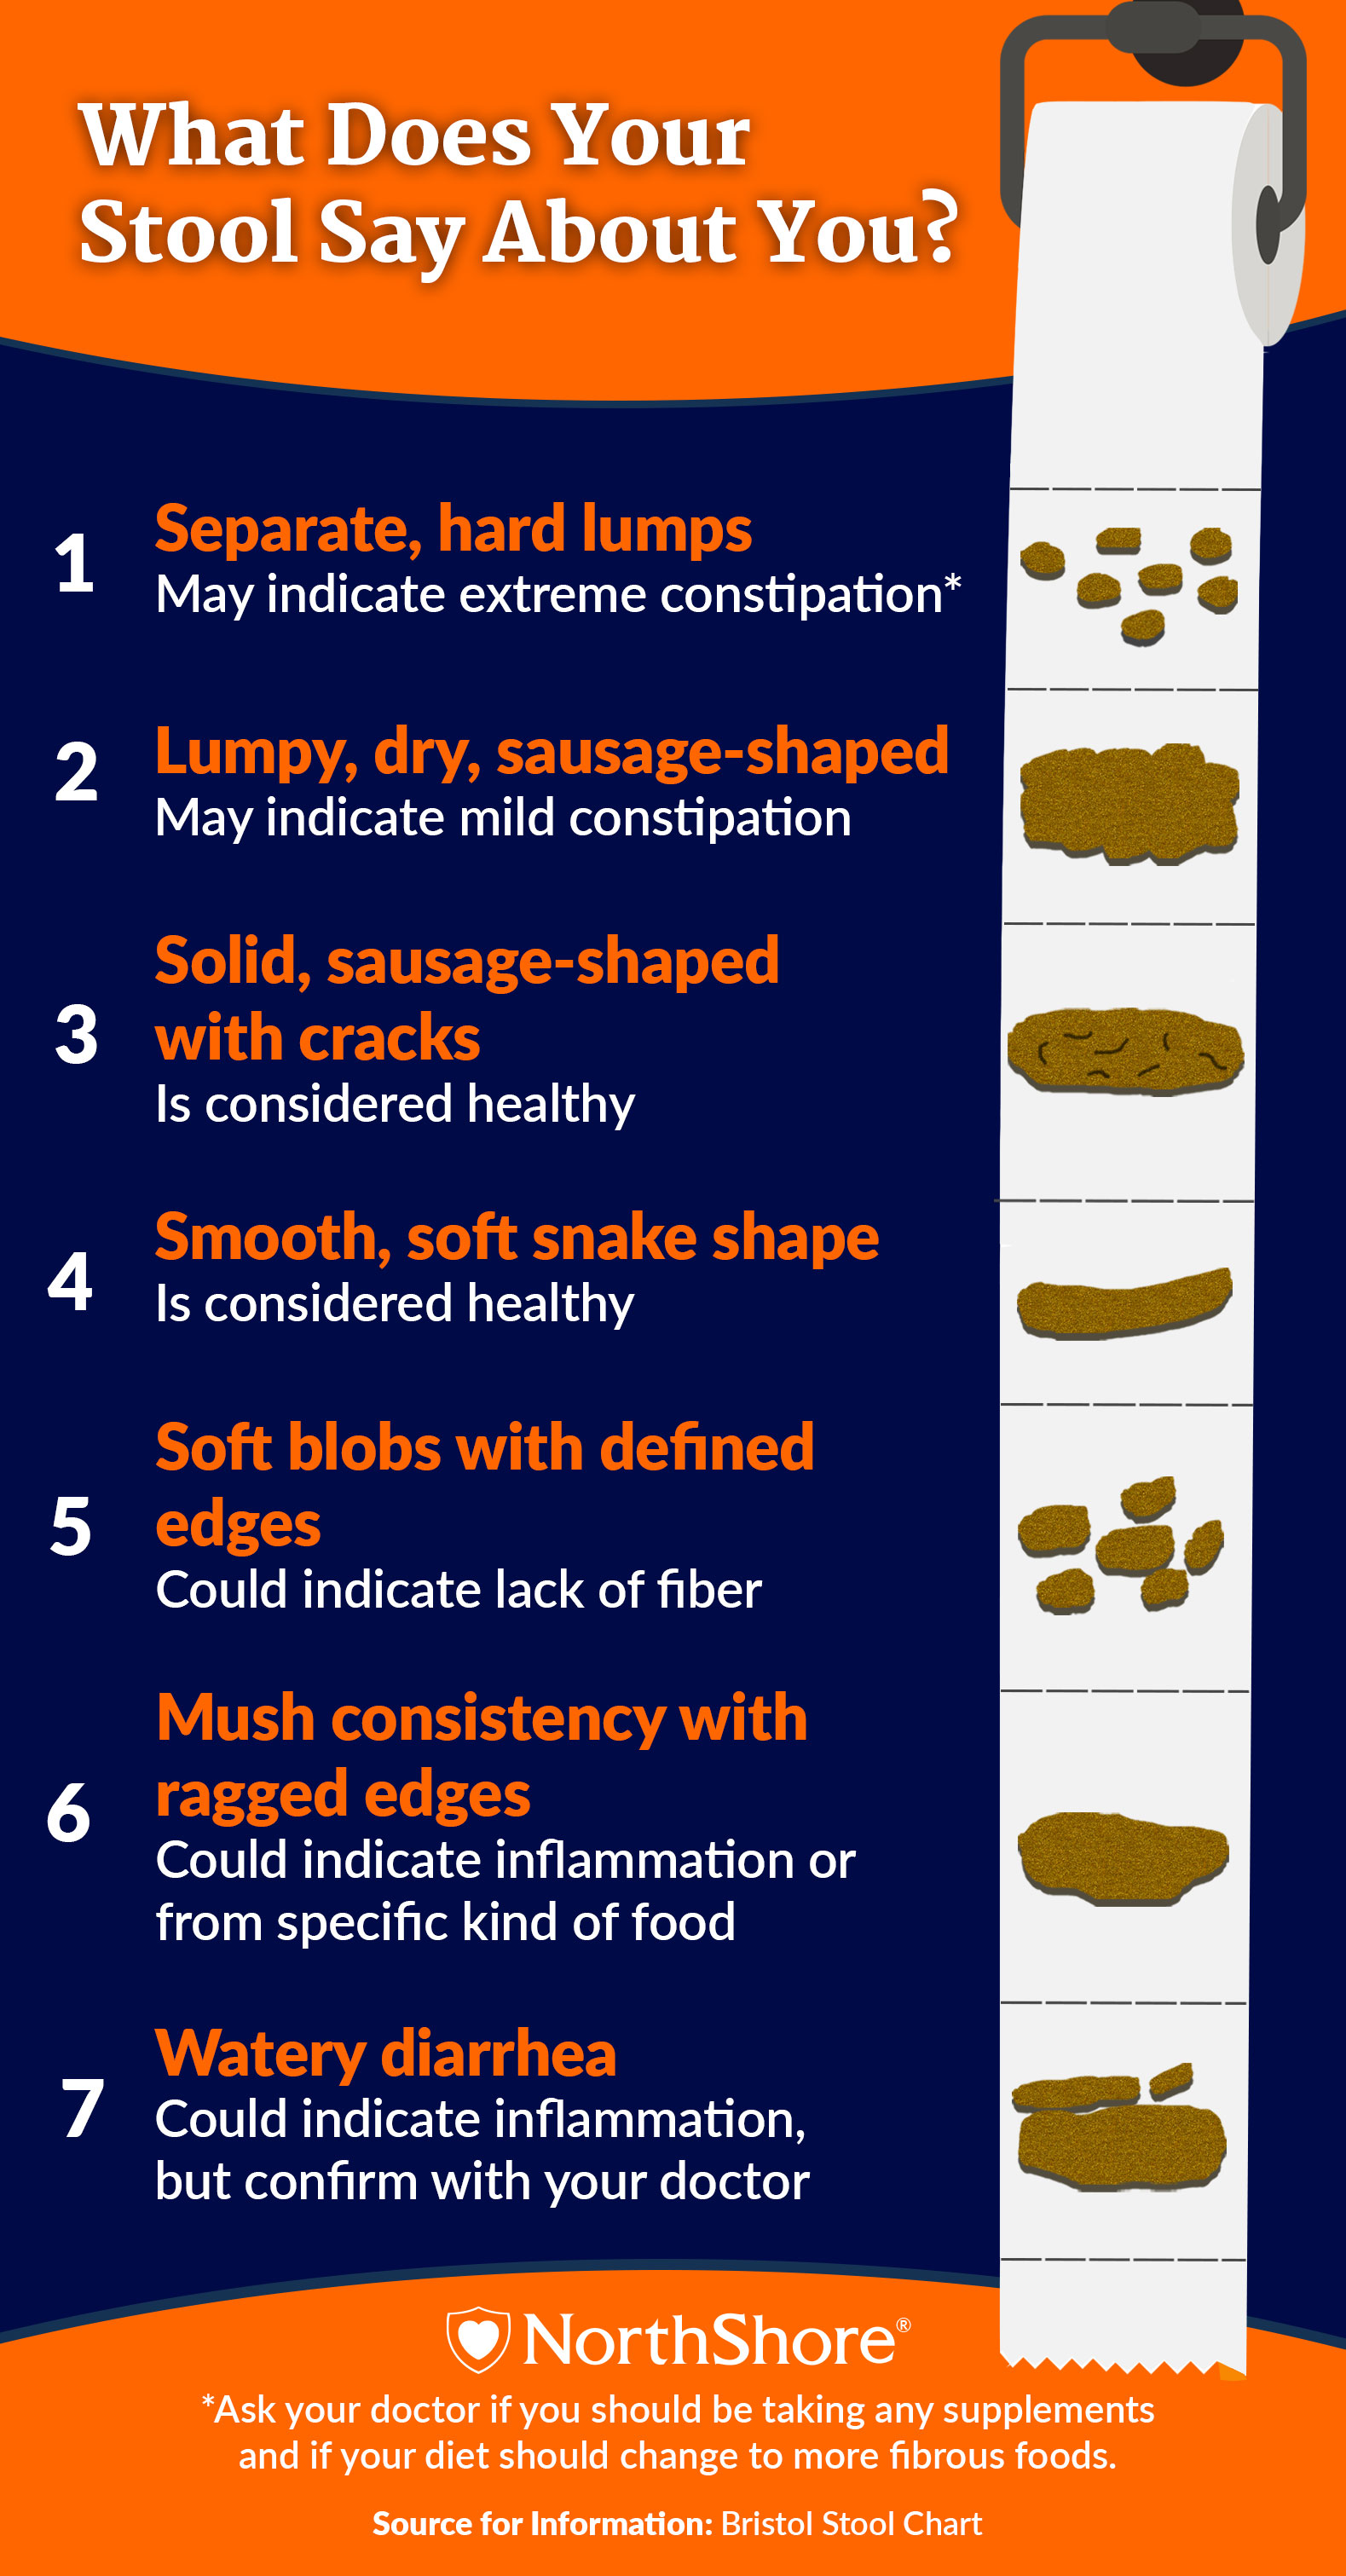 What Does Your Poop Say About You?